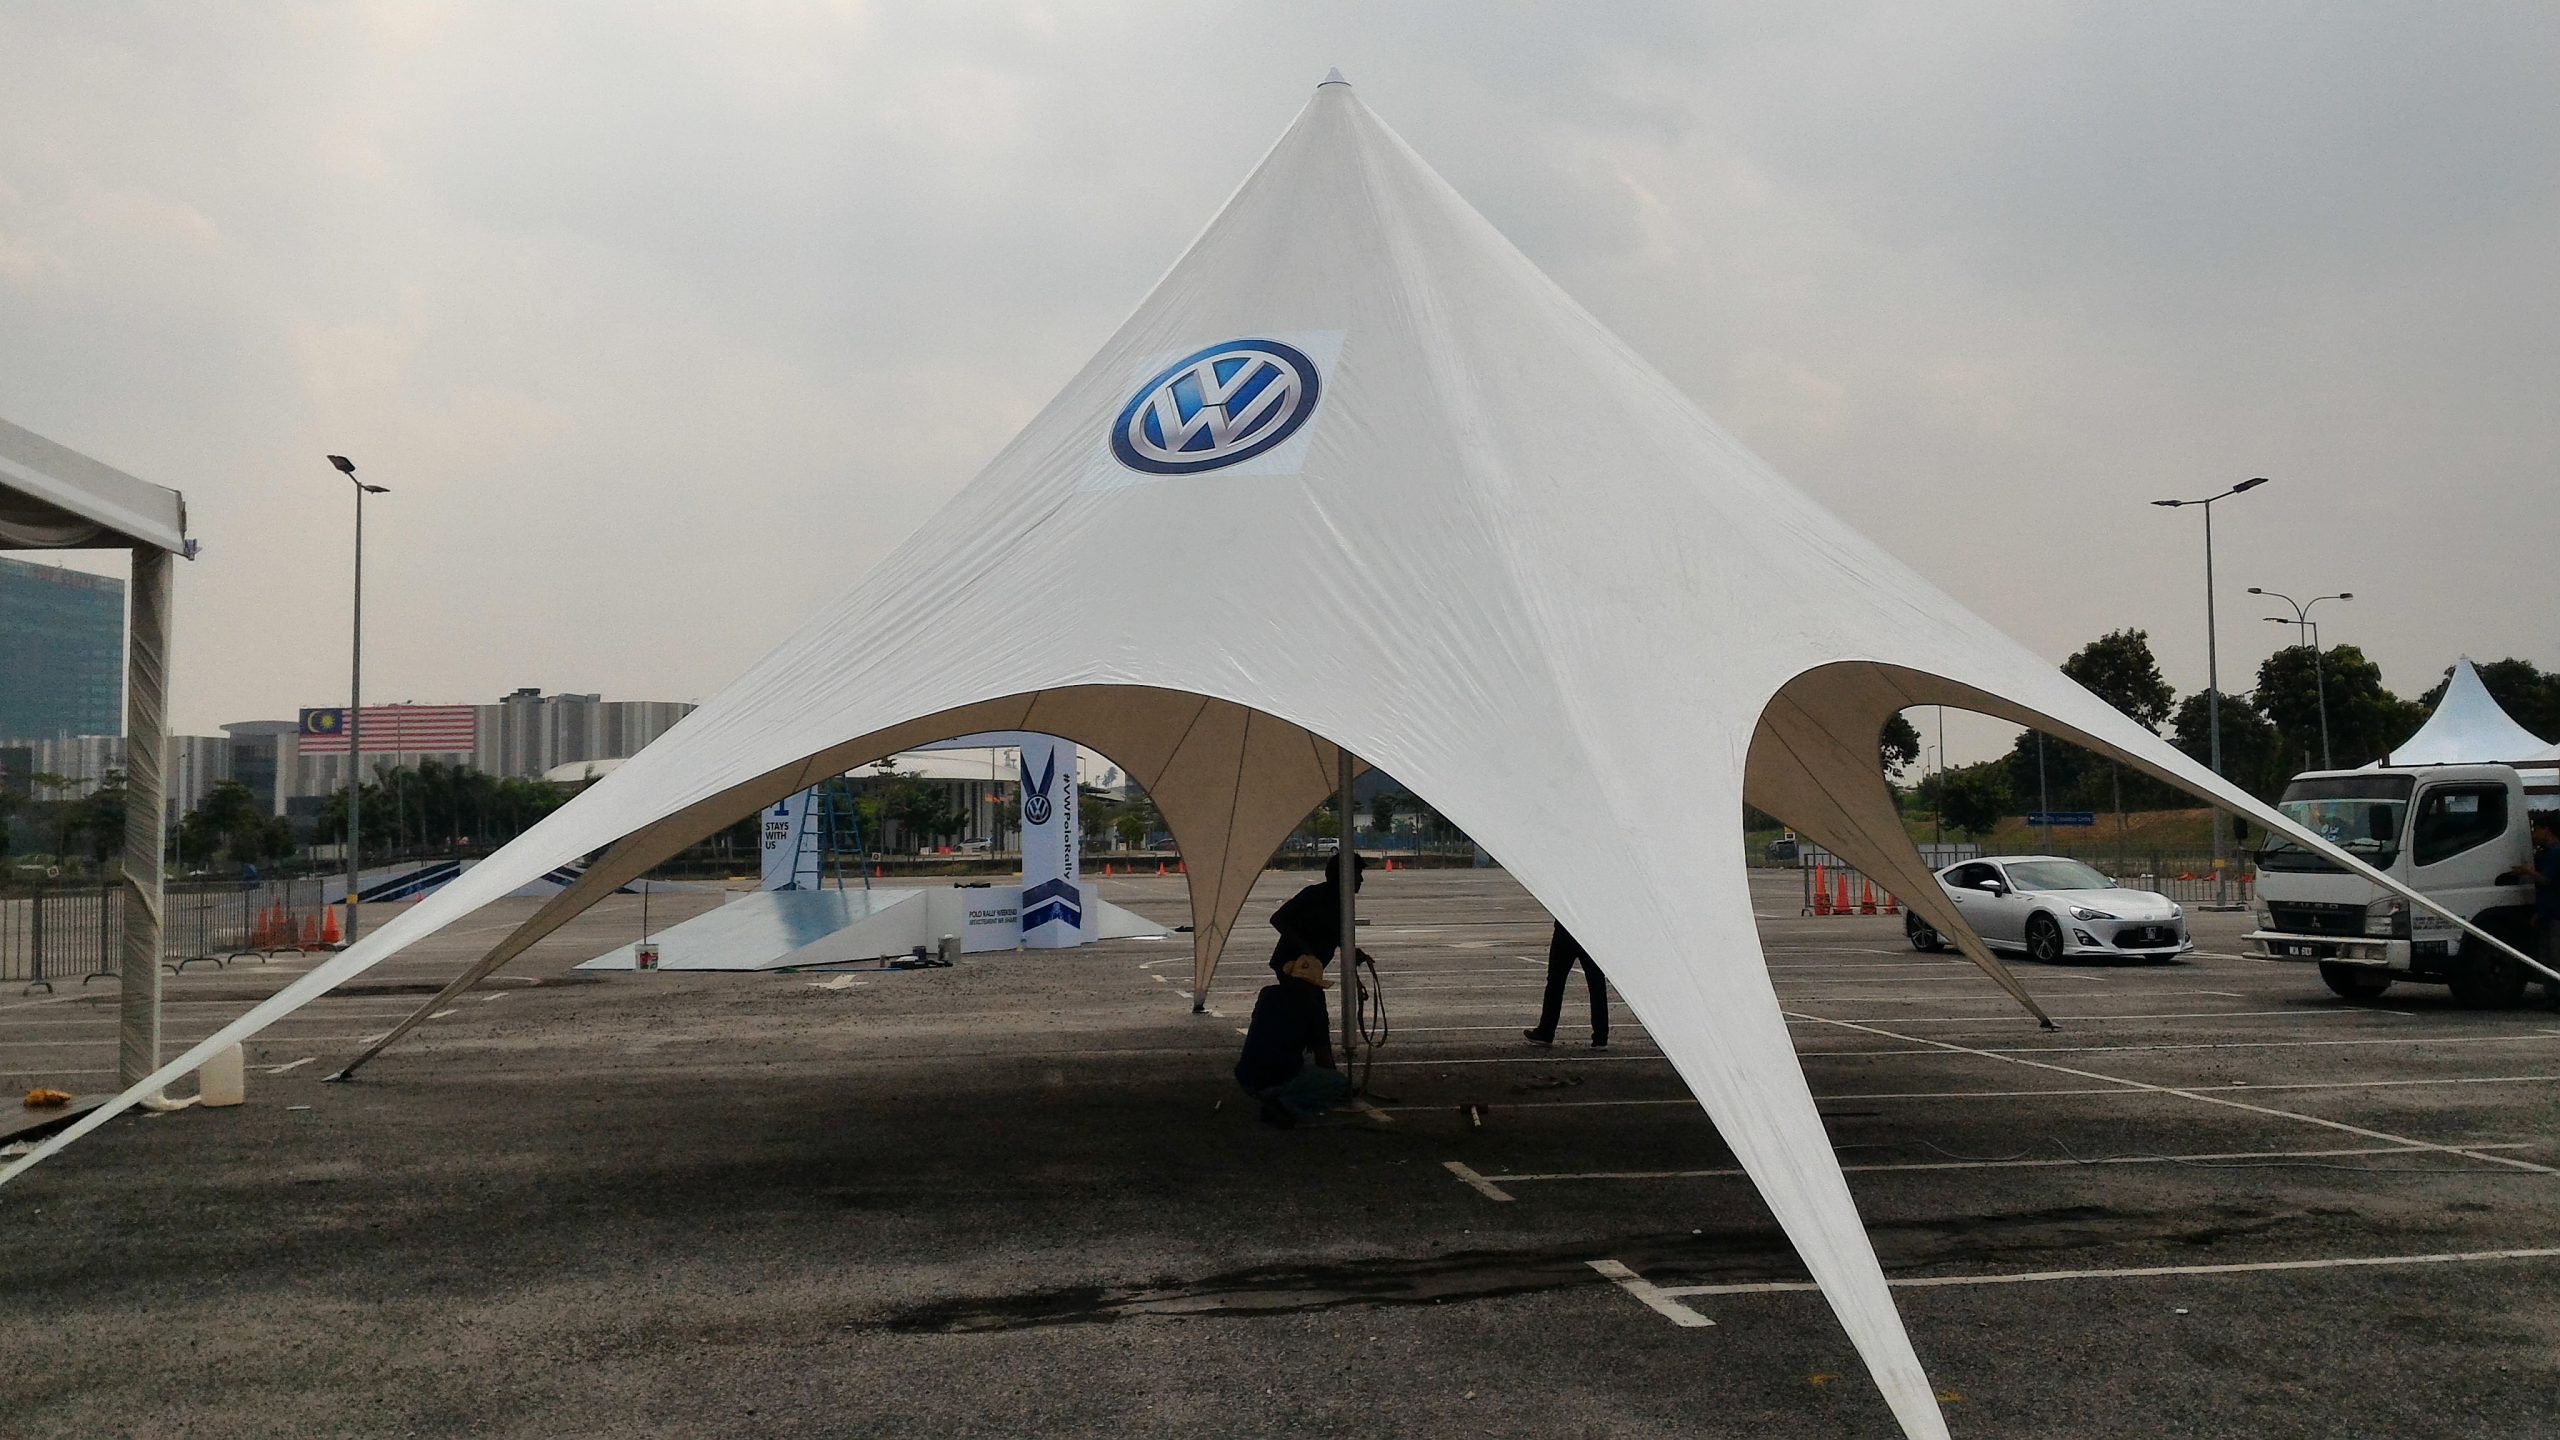 Star Tent with logo of VOLKSWAGEN Auto Show event